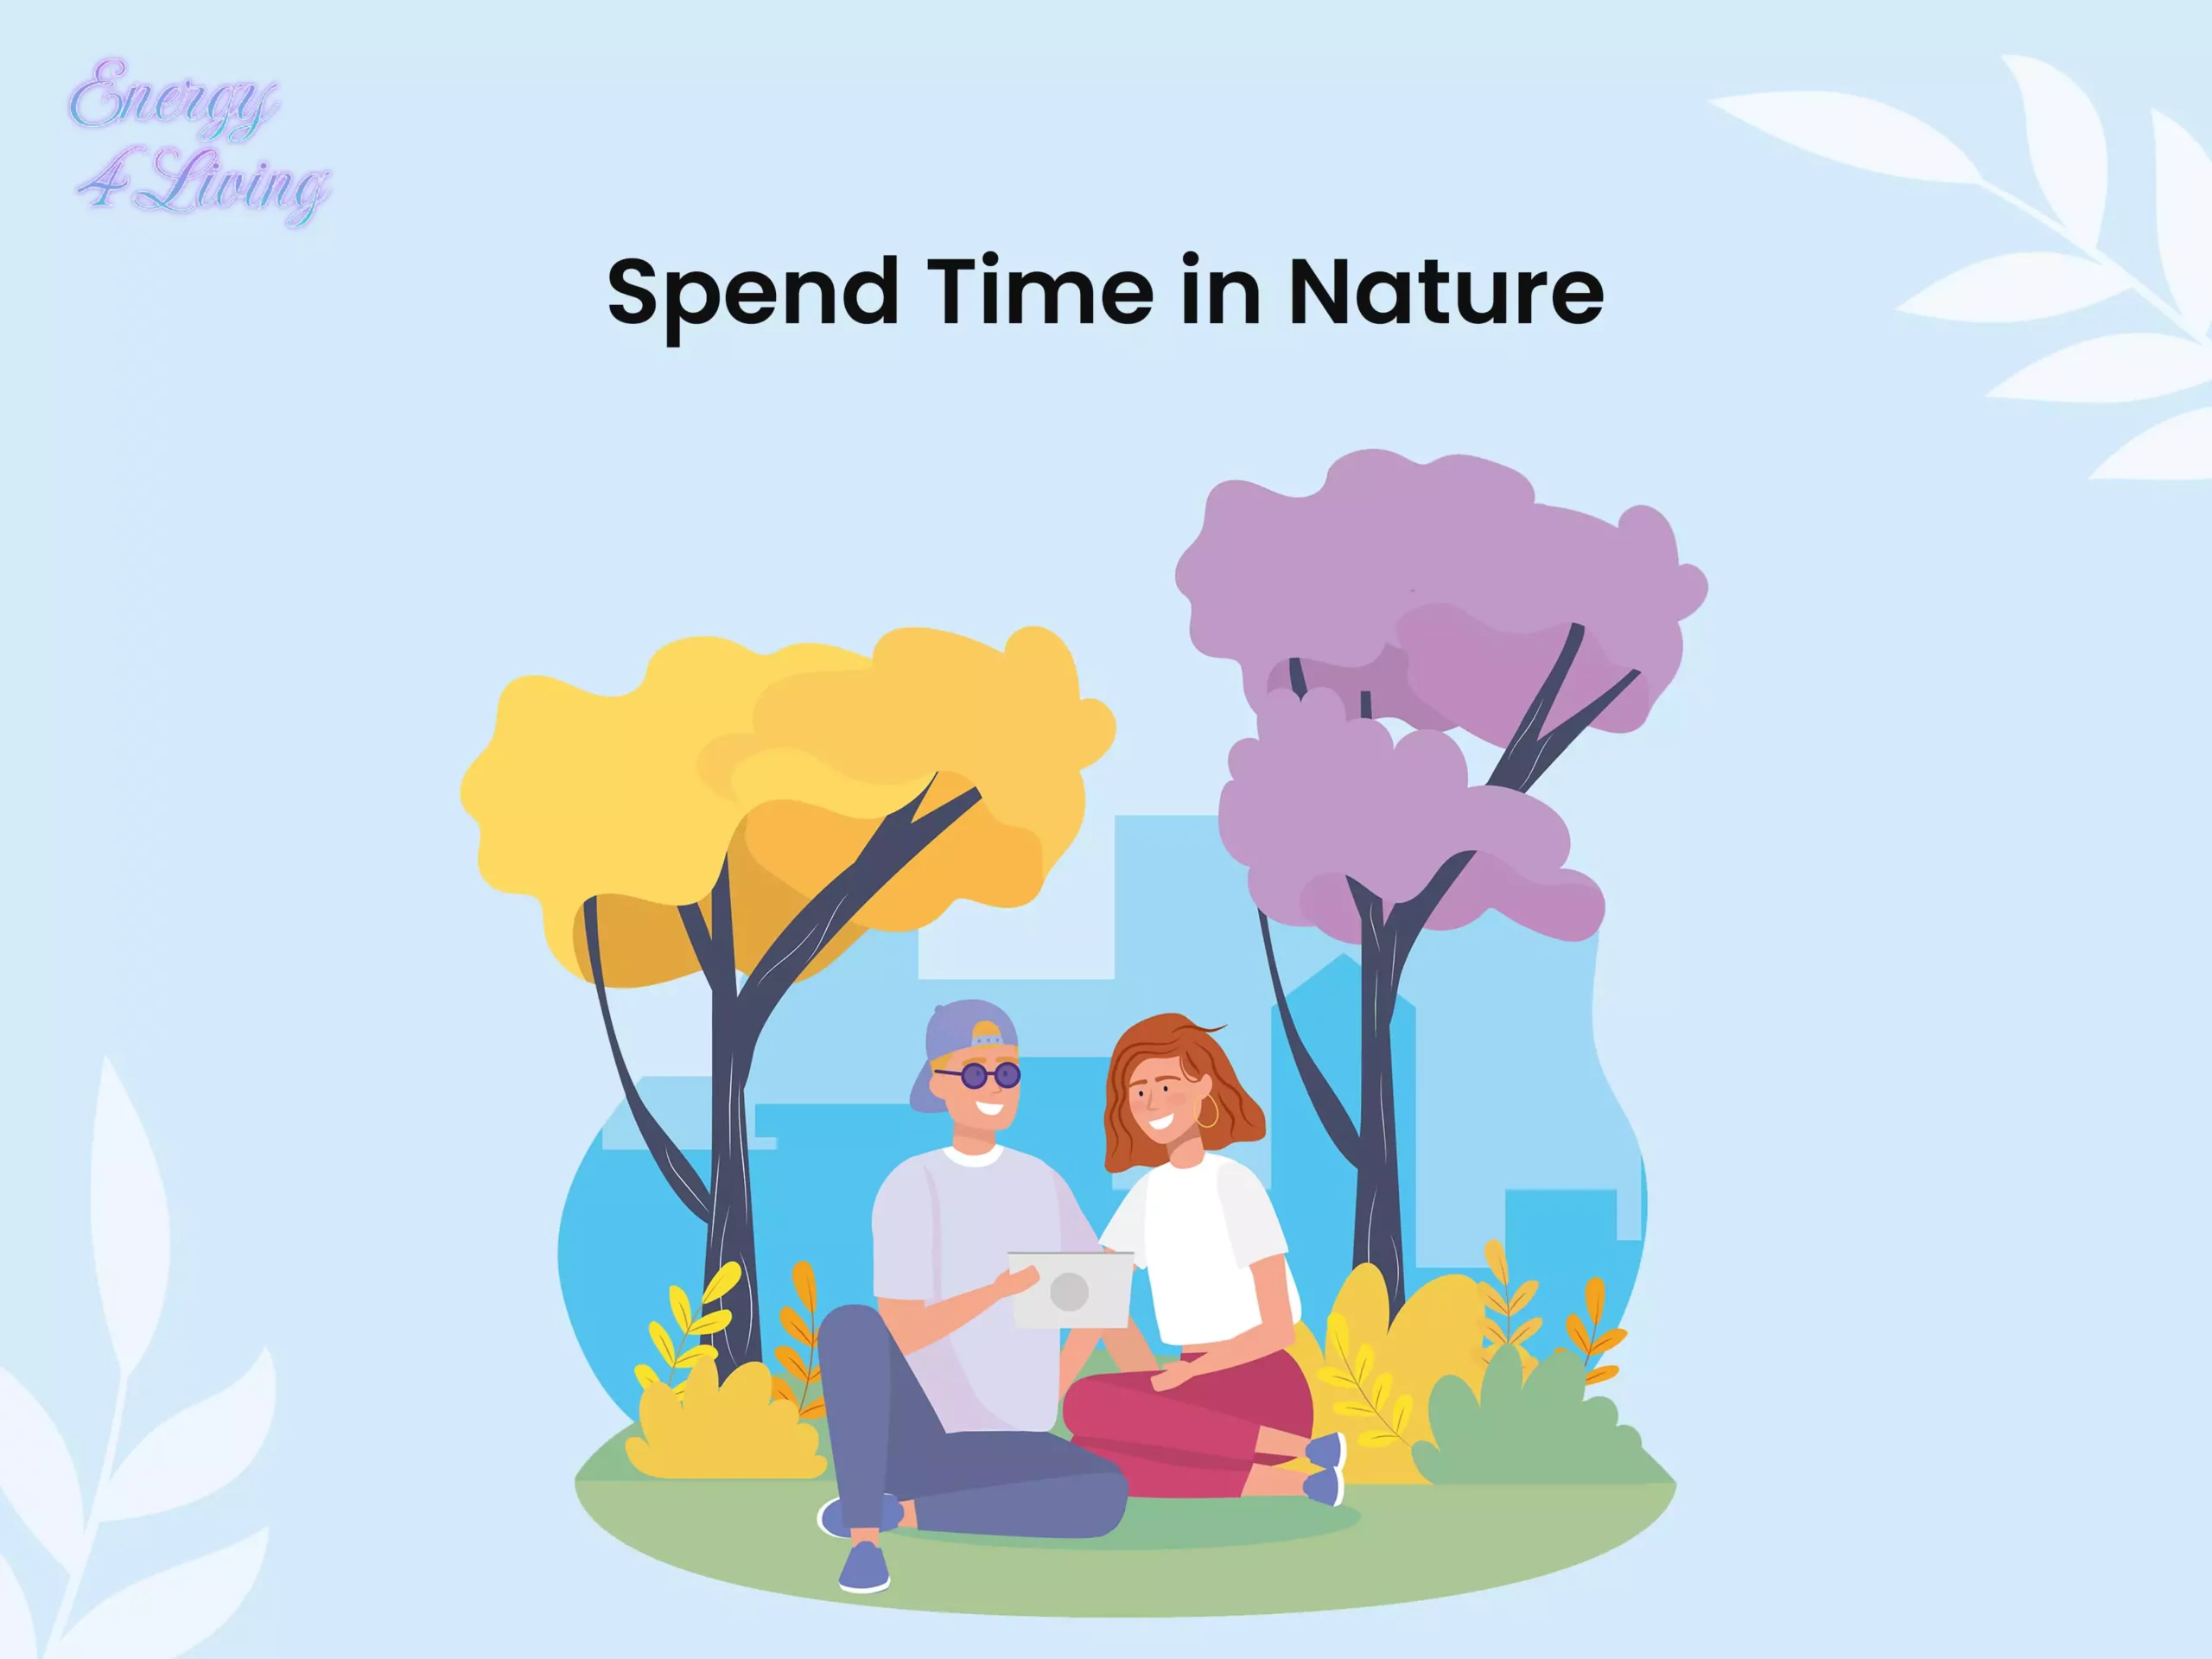 Spend Time in Nature